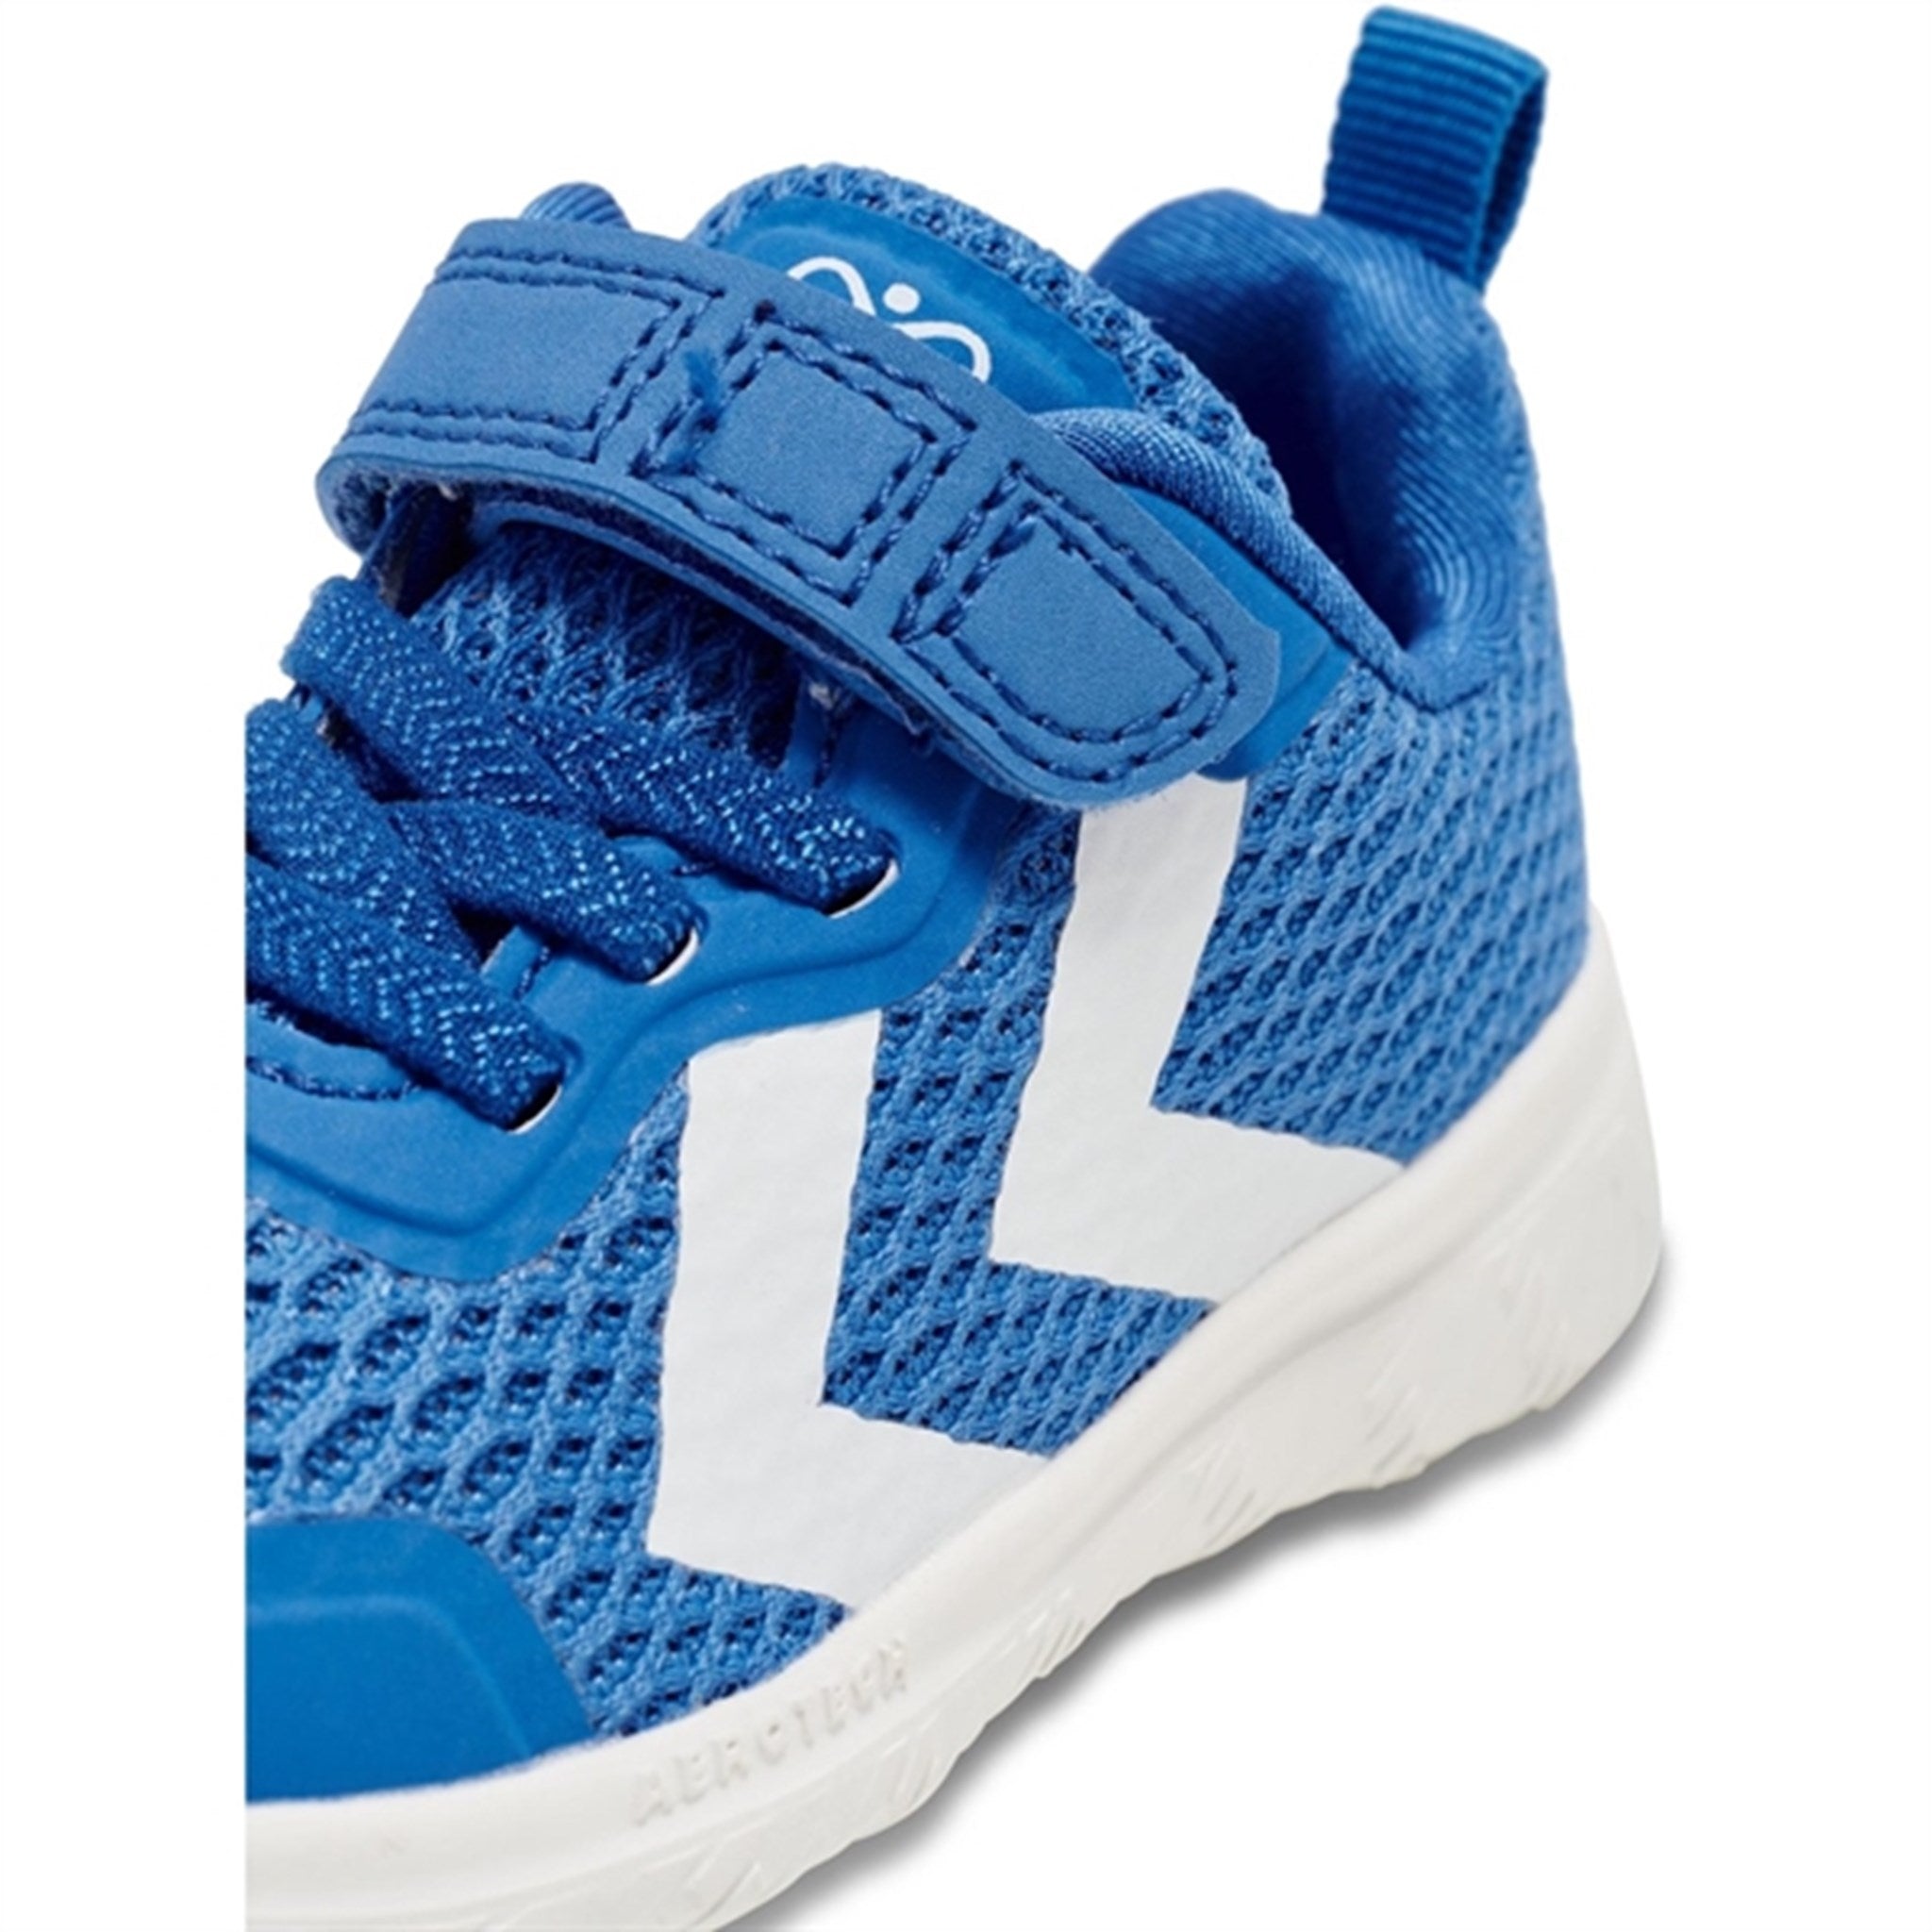 Hummel Actus Recycled Infant Sneakers Blue/White 4